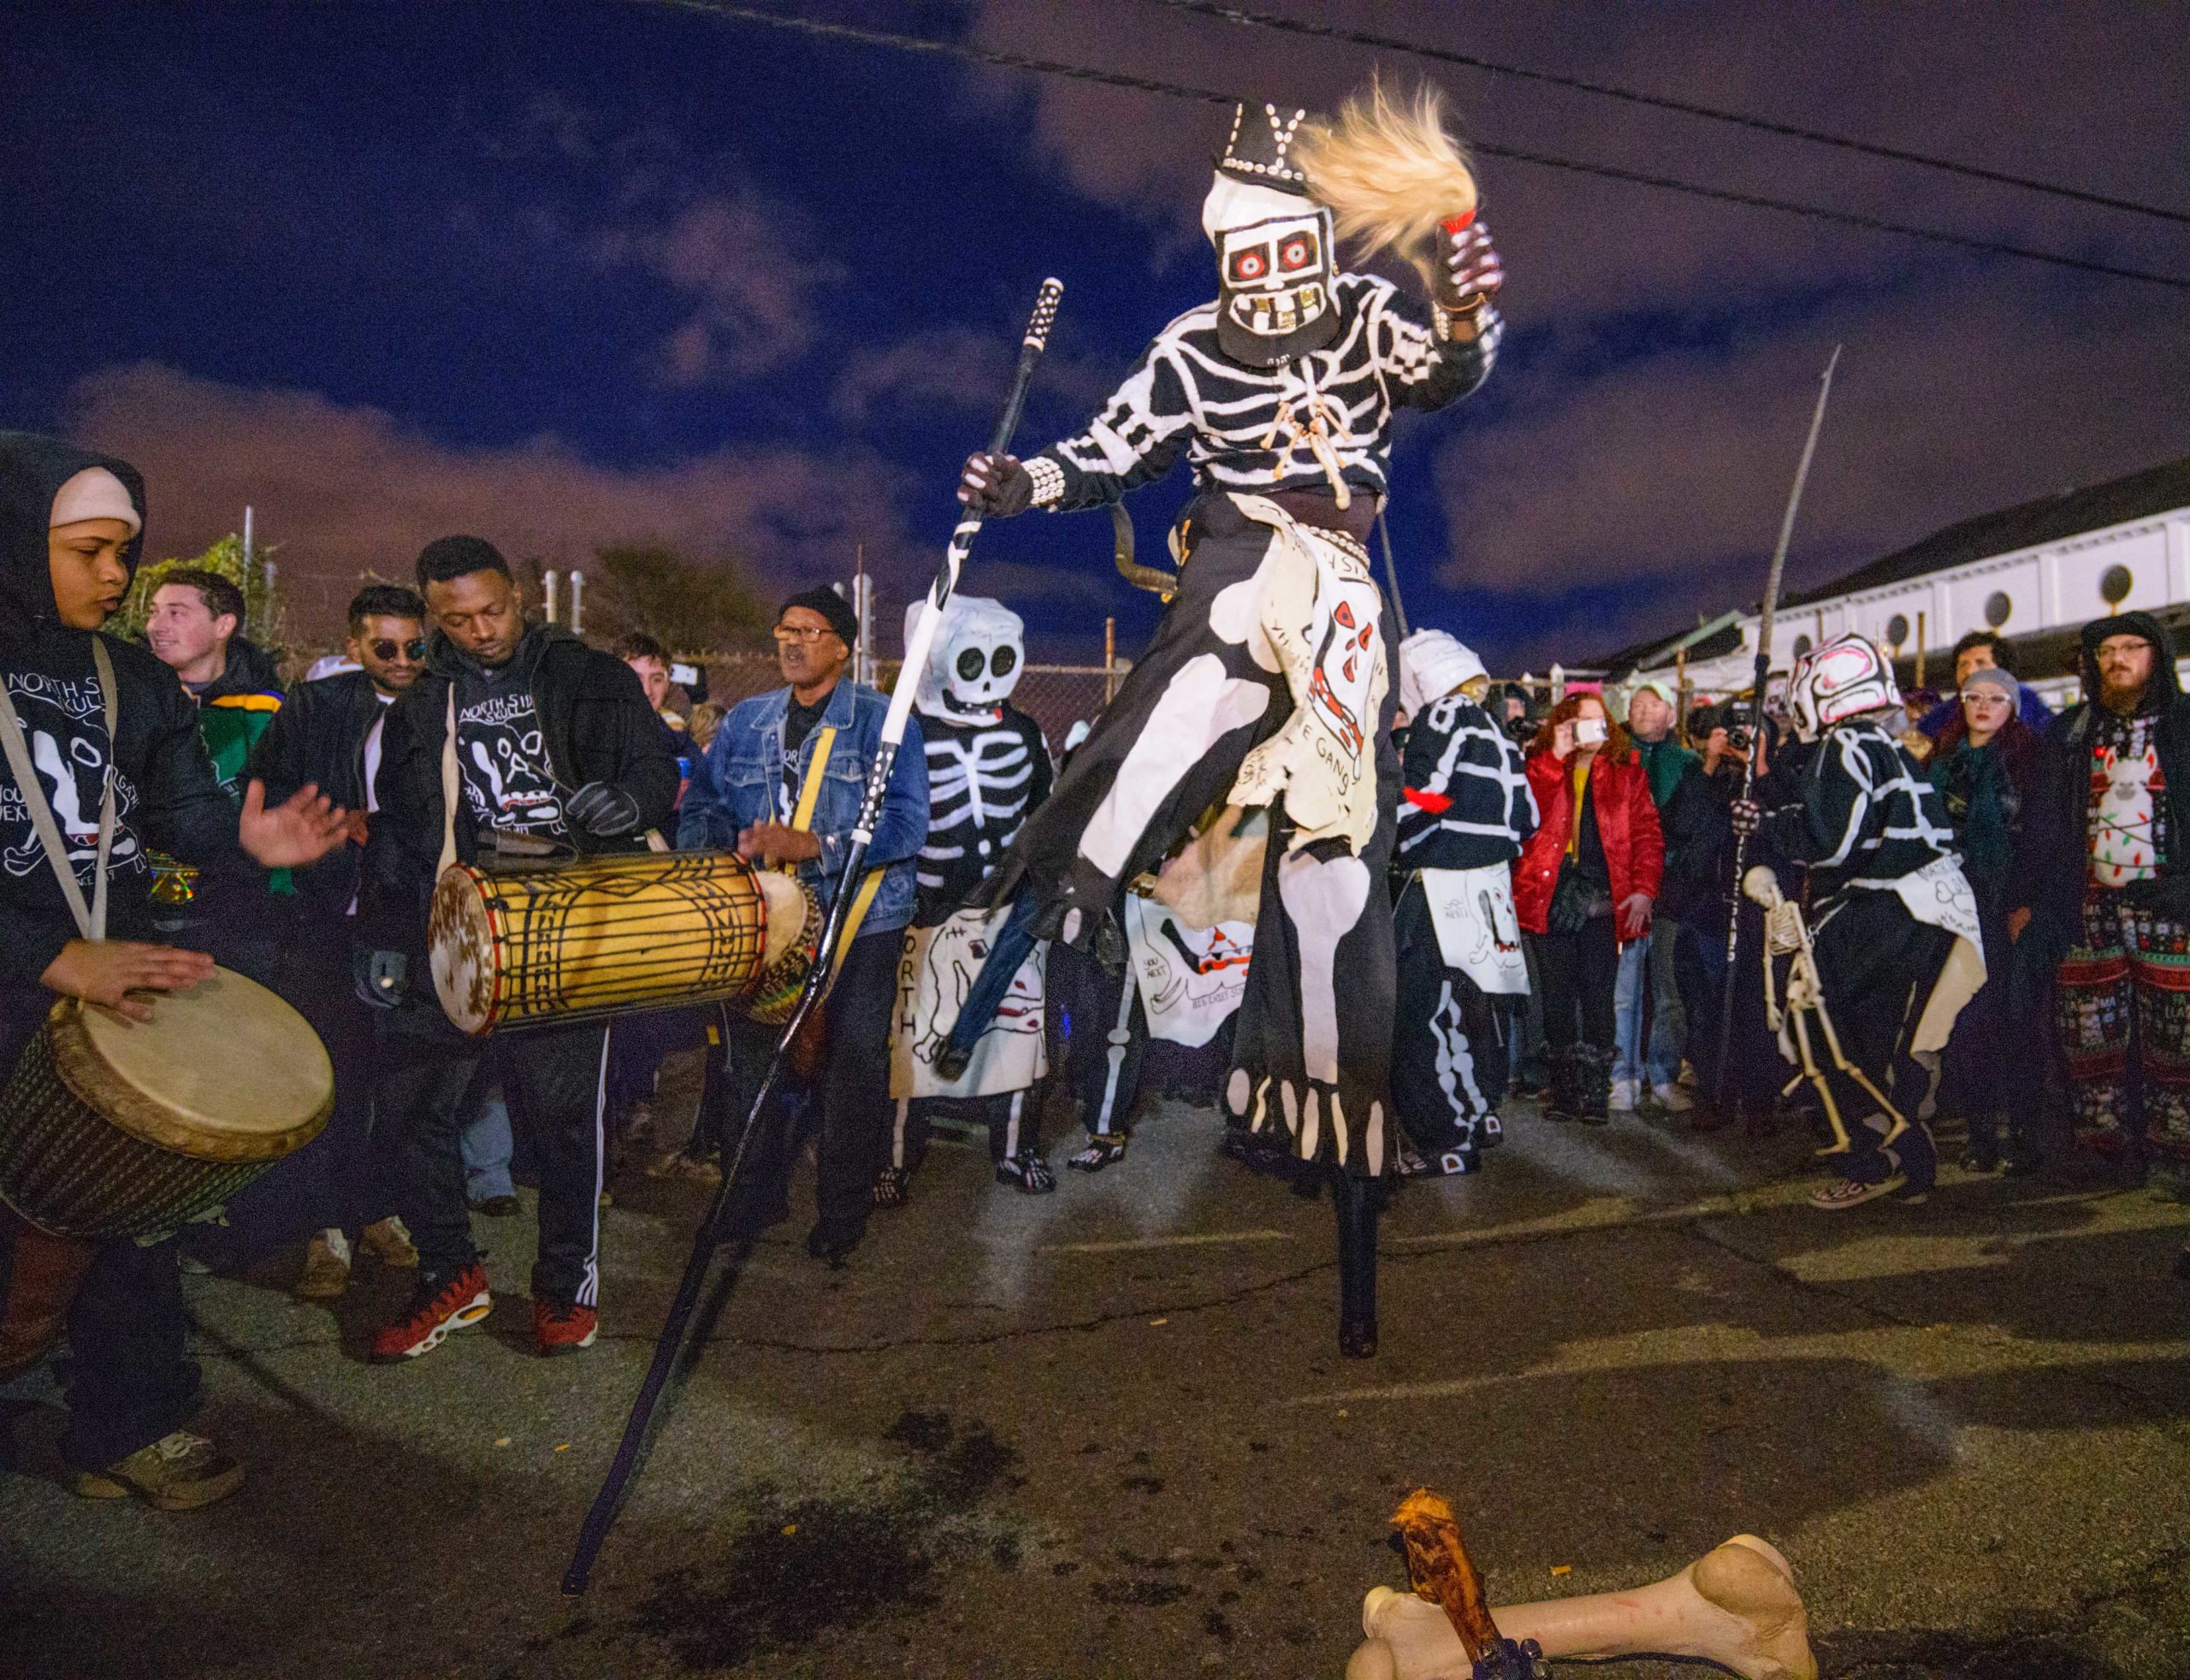 The North Side Skull and Bones Gang wakes up revelers on Mardi Gras morning in New Orleans, La., March 5, 2019. The group is celebrating its 200th anniversary as the oldest Mardi Gras Black Indian Gang or Tribe in America, with an African Creole tradition dating back to 1819. The gang members were descendants of slaves and Native Americans. Skull and Bones are meant to remind people of their mortality and to live a moral life to avoid becoming Skull and Bones themselves. Photo by Matthew Hinton